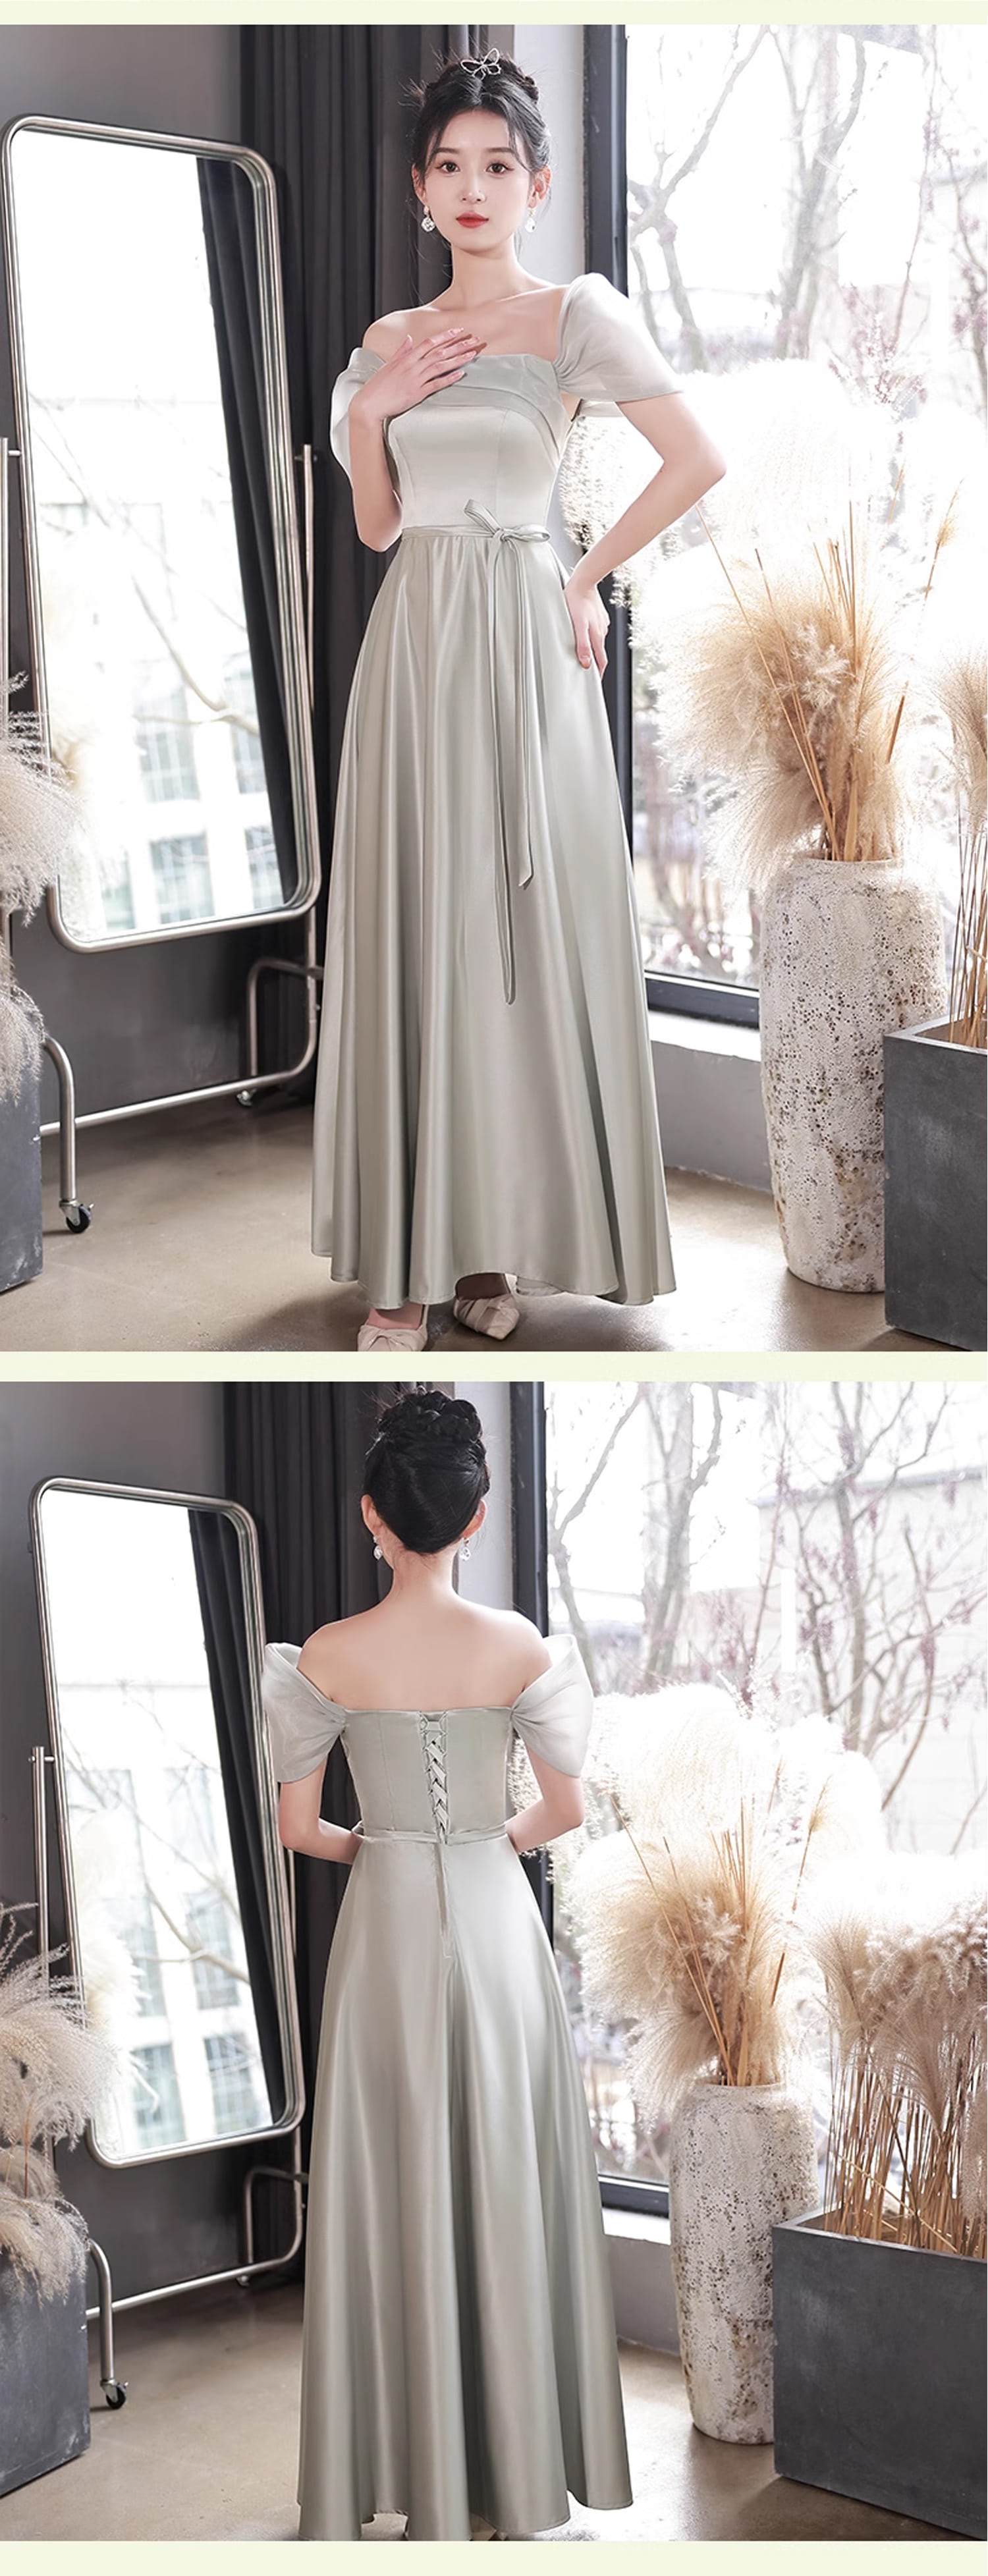 Simple-Gray-Satin-Bridesmaid-Dress-Sweet-Casual-Party-Ball-Gown23